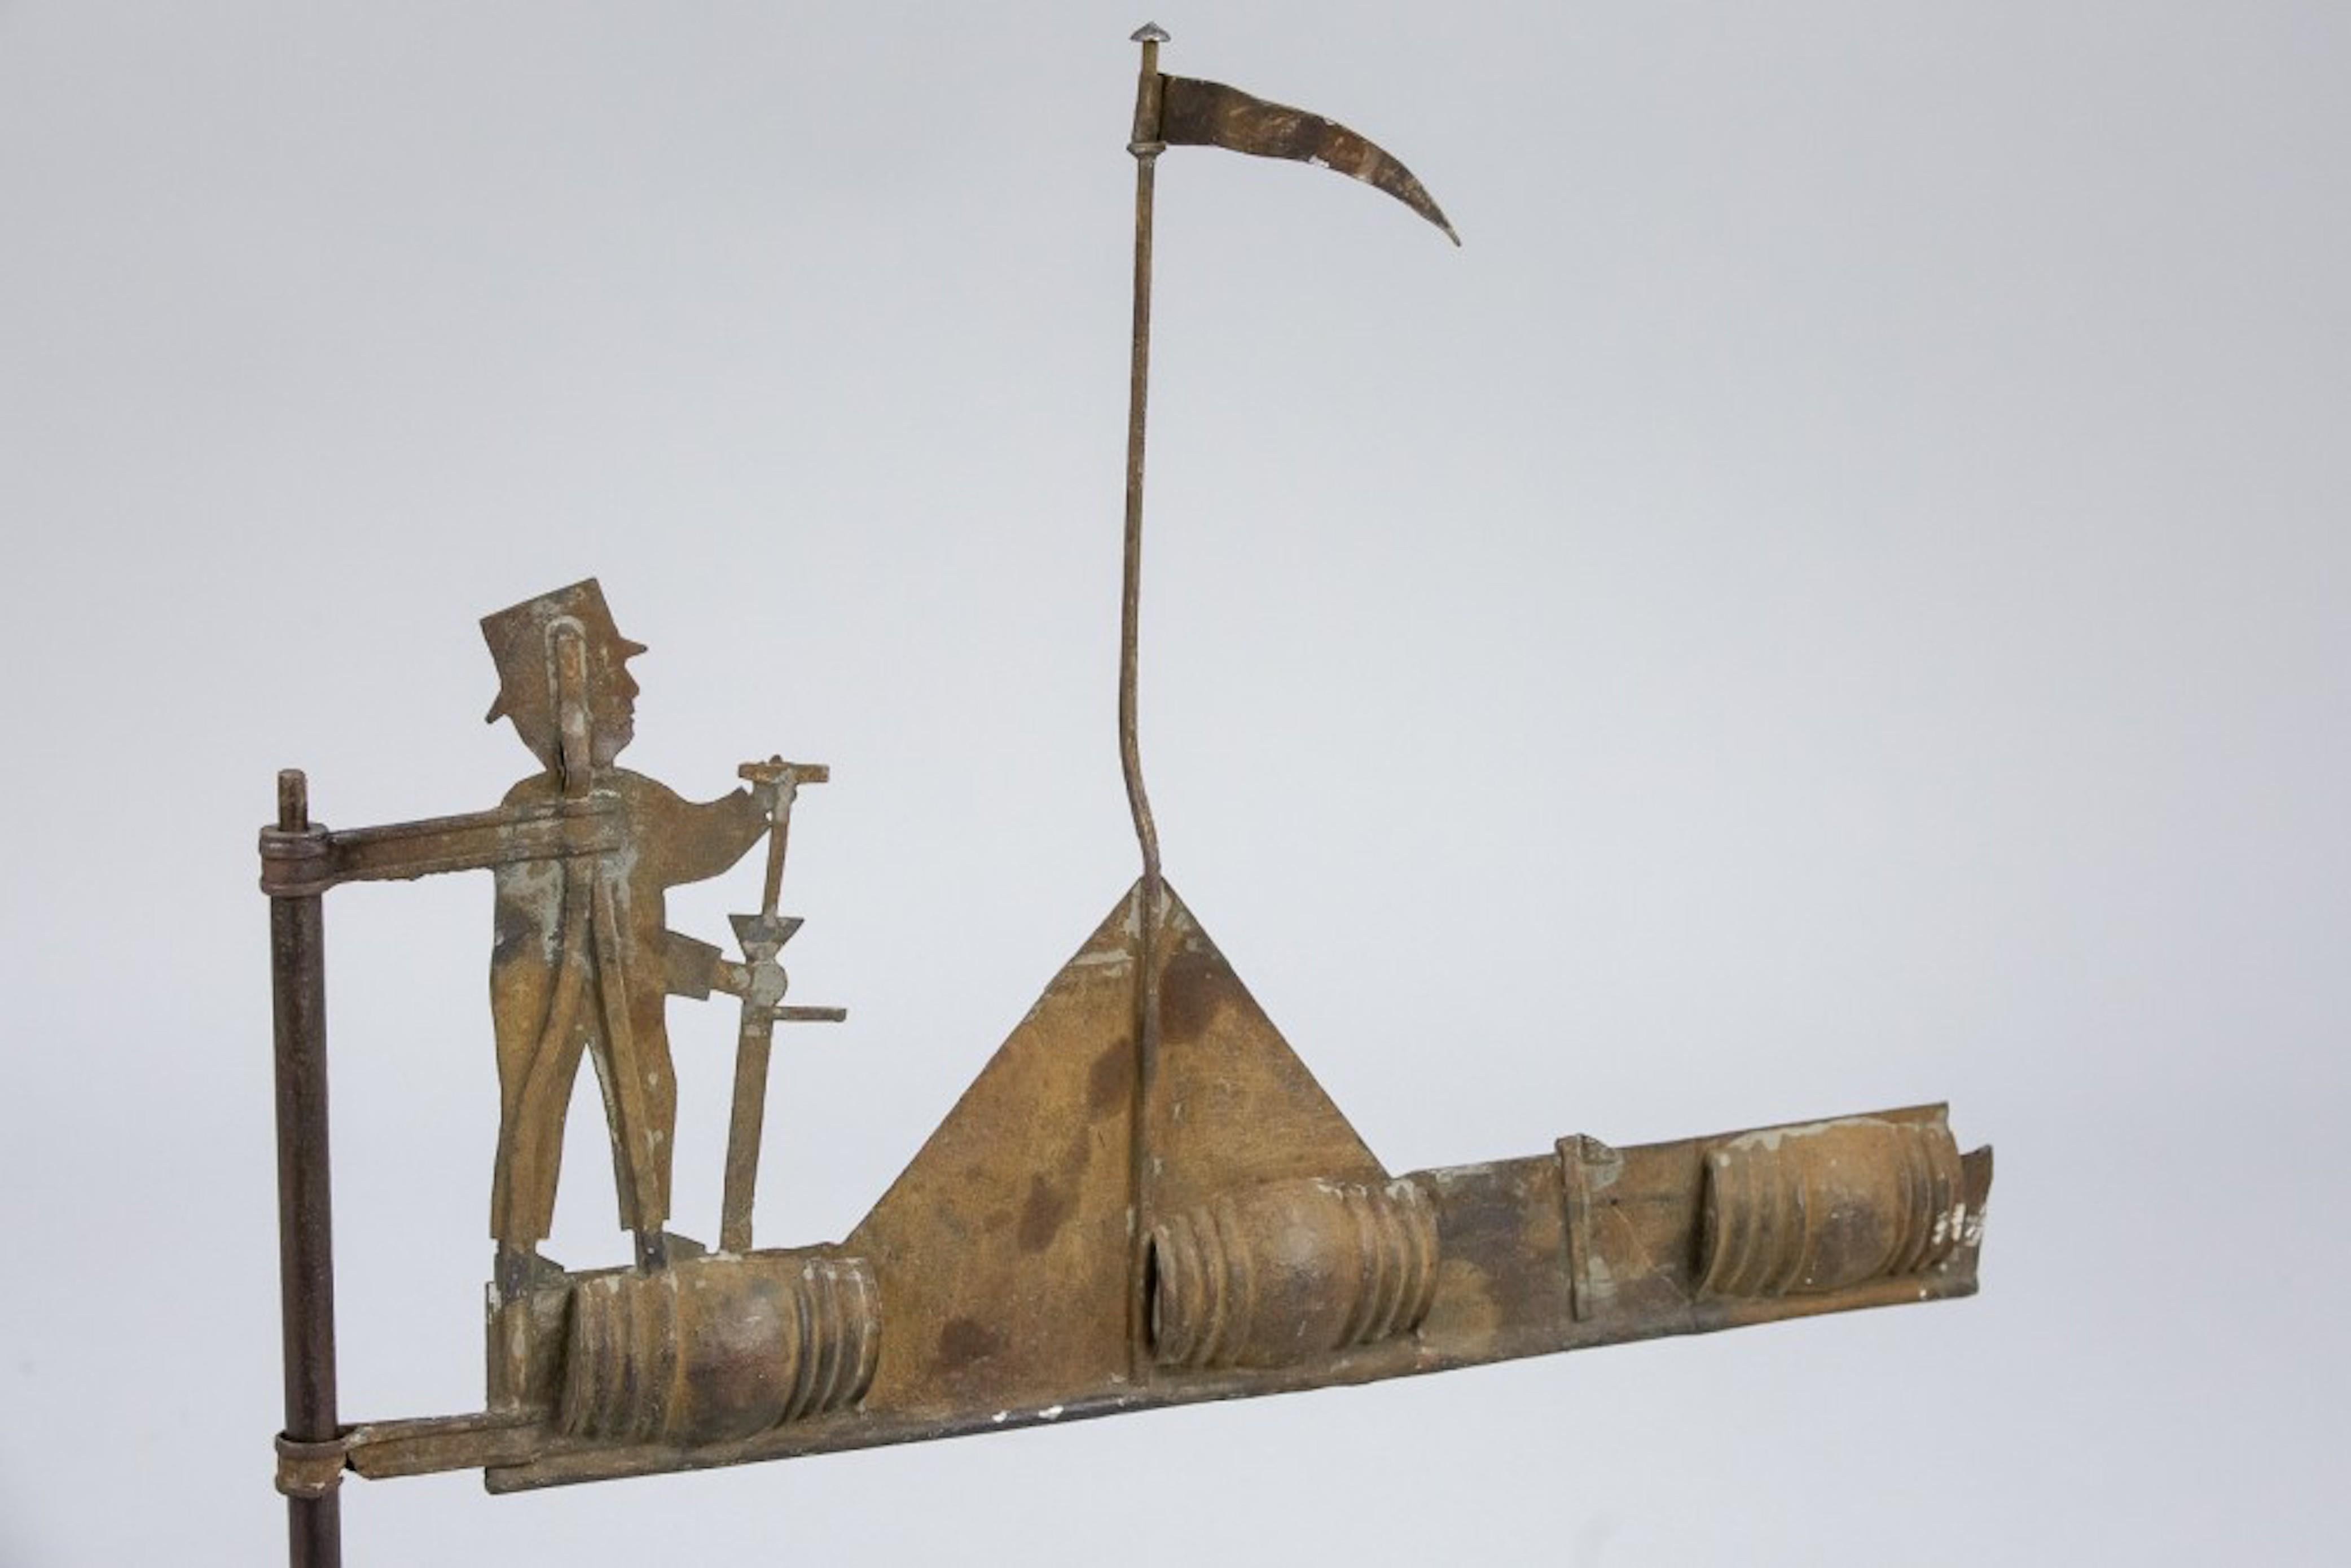 Rare form folk art weathervane from France, circa 1880. Excellent patina and presented on a custom solid metal stand. The vintner testing his barreled produce, the barrels are full bodied. Most likely from a Vineyard, perfect for the wine enthusiast!